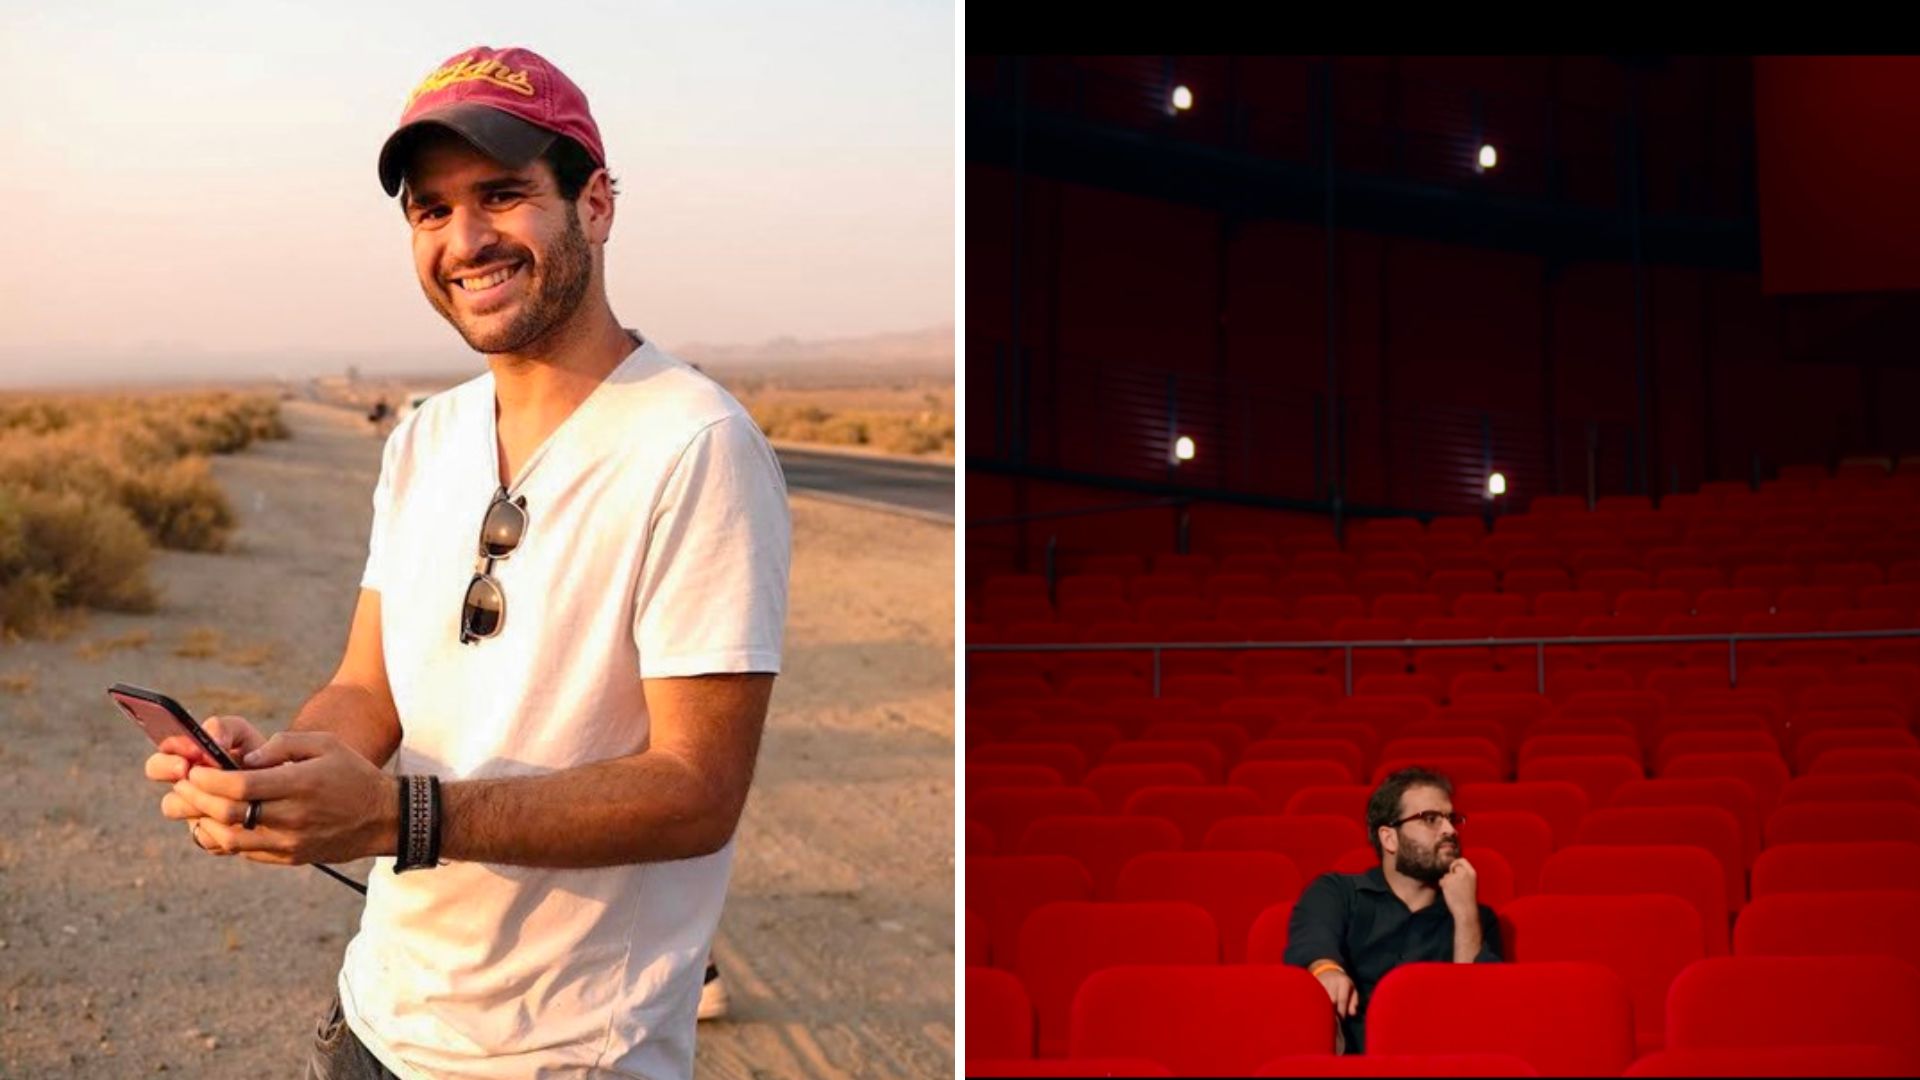 Q&A with Guillermo Casarín, Grand Prize Winner of ¡Tú Cuentas! Cine Youth Film Festival 2022